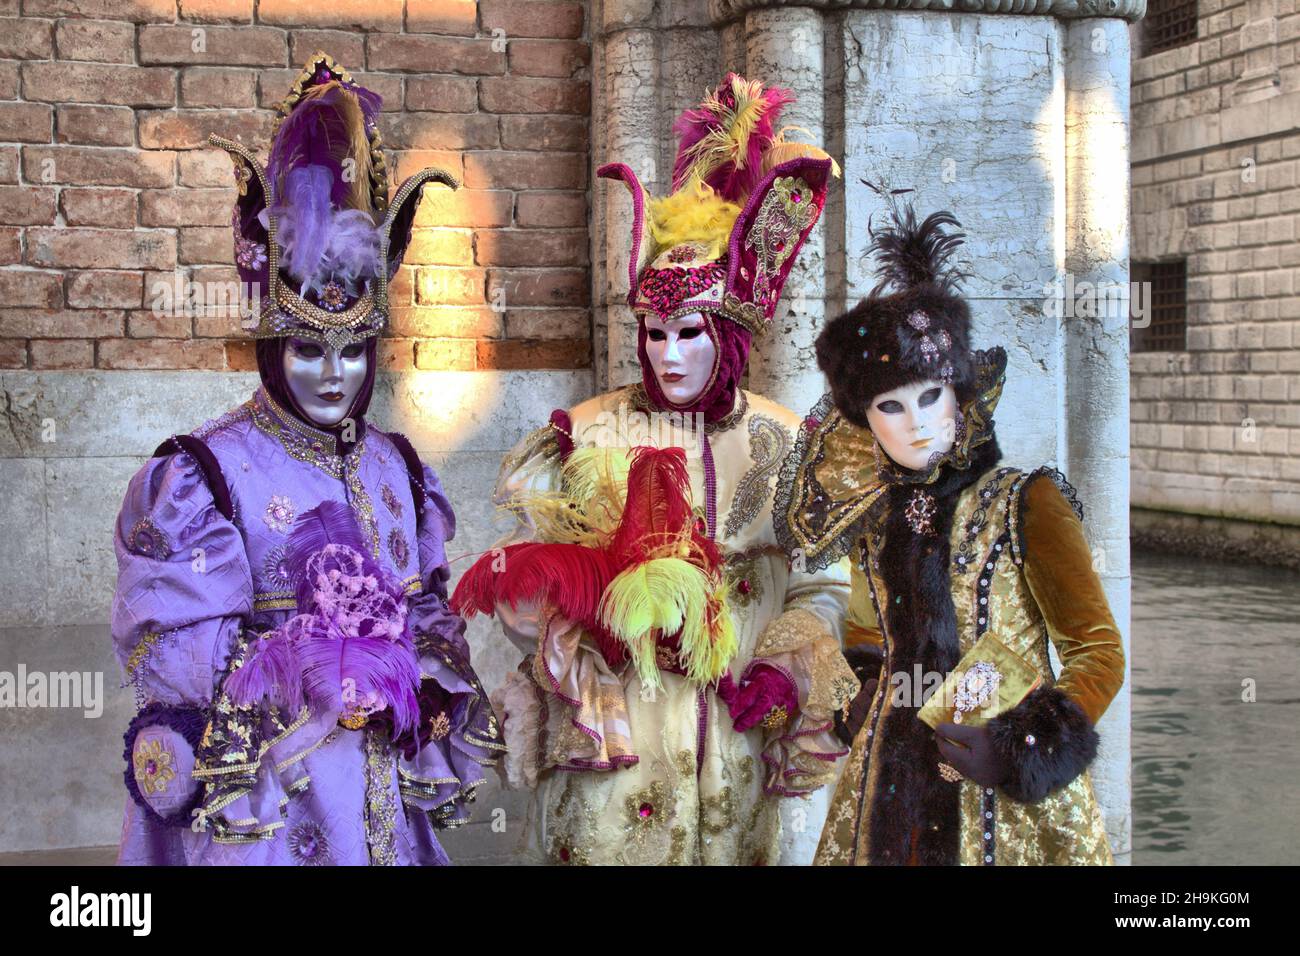 Venice, Italy - February 10, 2018: Three people in Venetian costume attends the Carnival of Venice, Italy Stock Photo